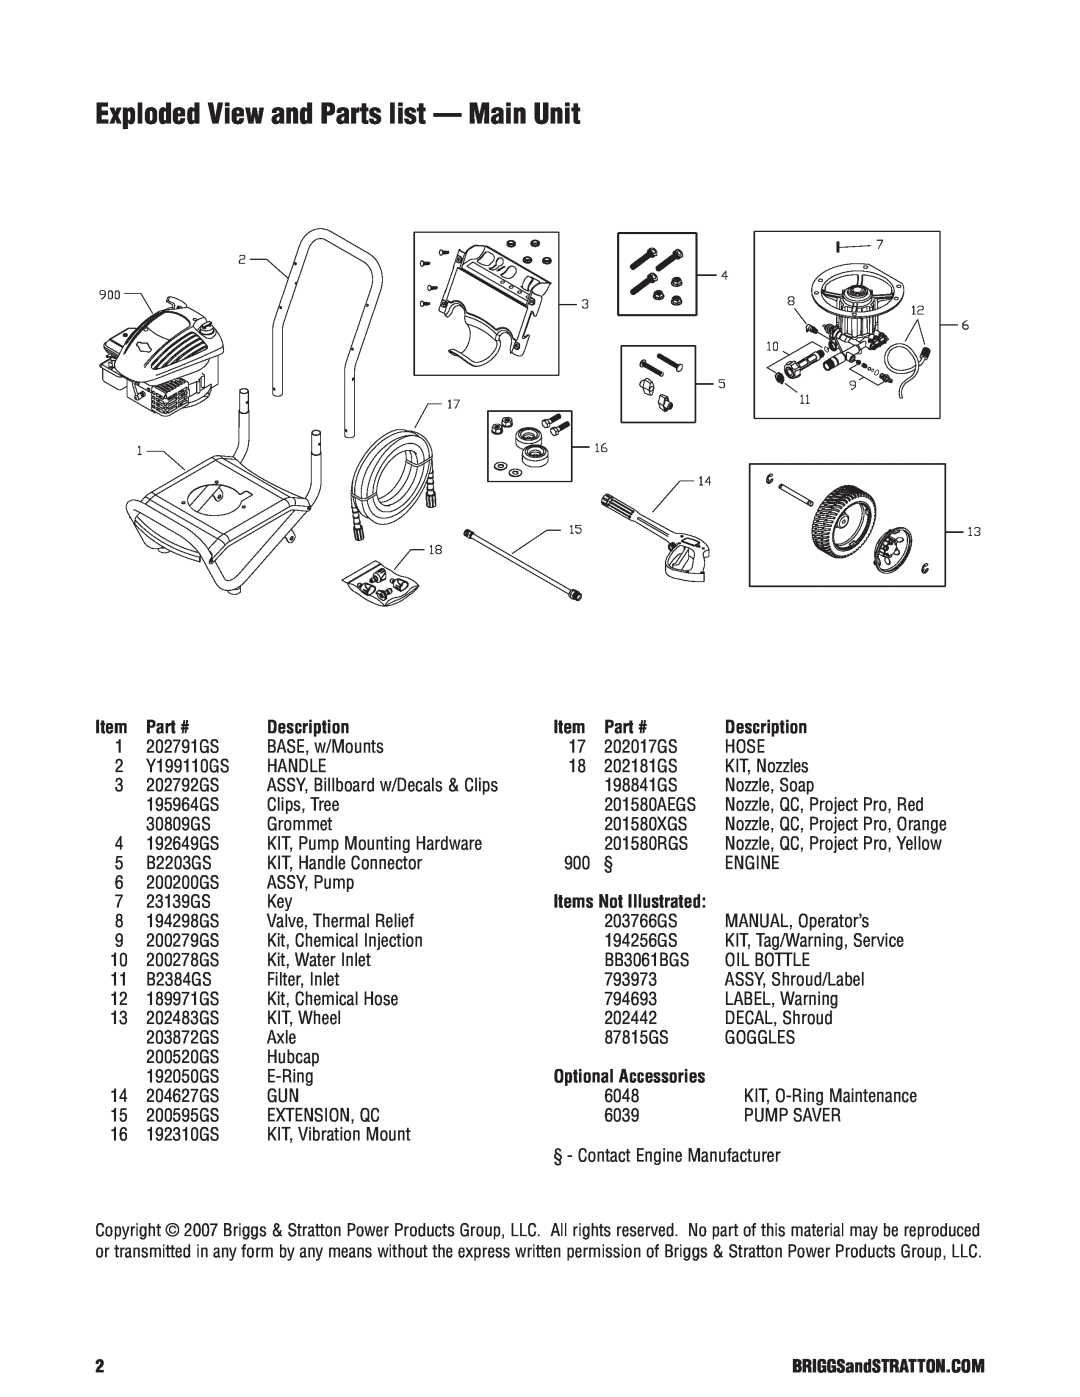 Briggs & Stratton 20318 manual Exploded View and Parts list - Main Unit, Description, Items Not Illustrated 